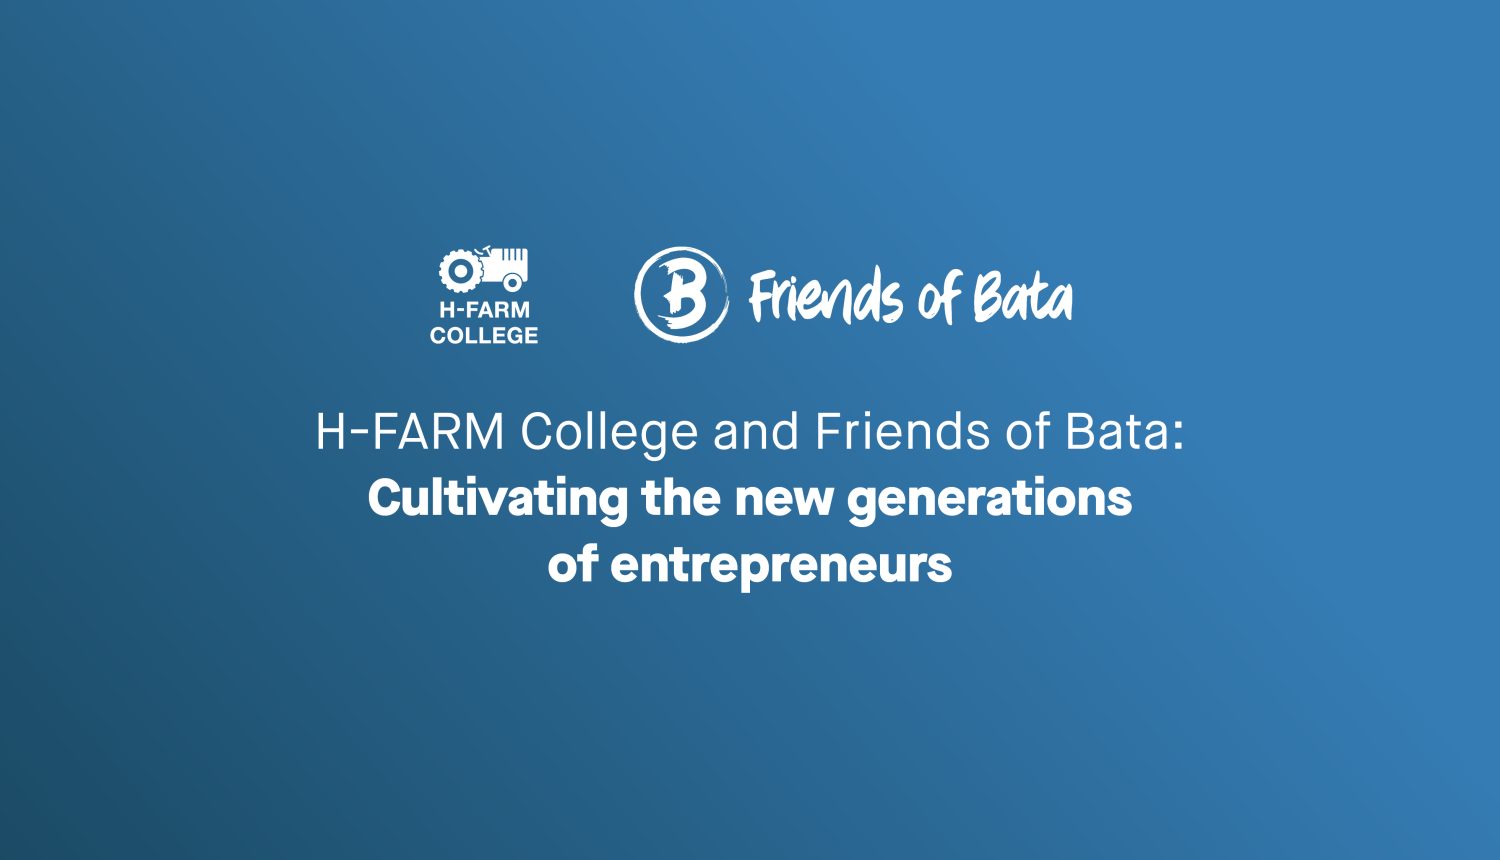 H-FARM College and Friends of Bata: cultivating the new generations of entrepreneurs